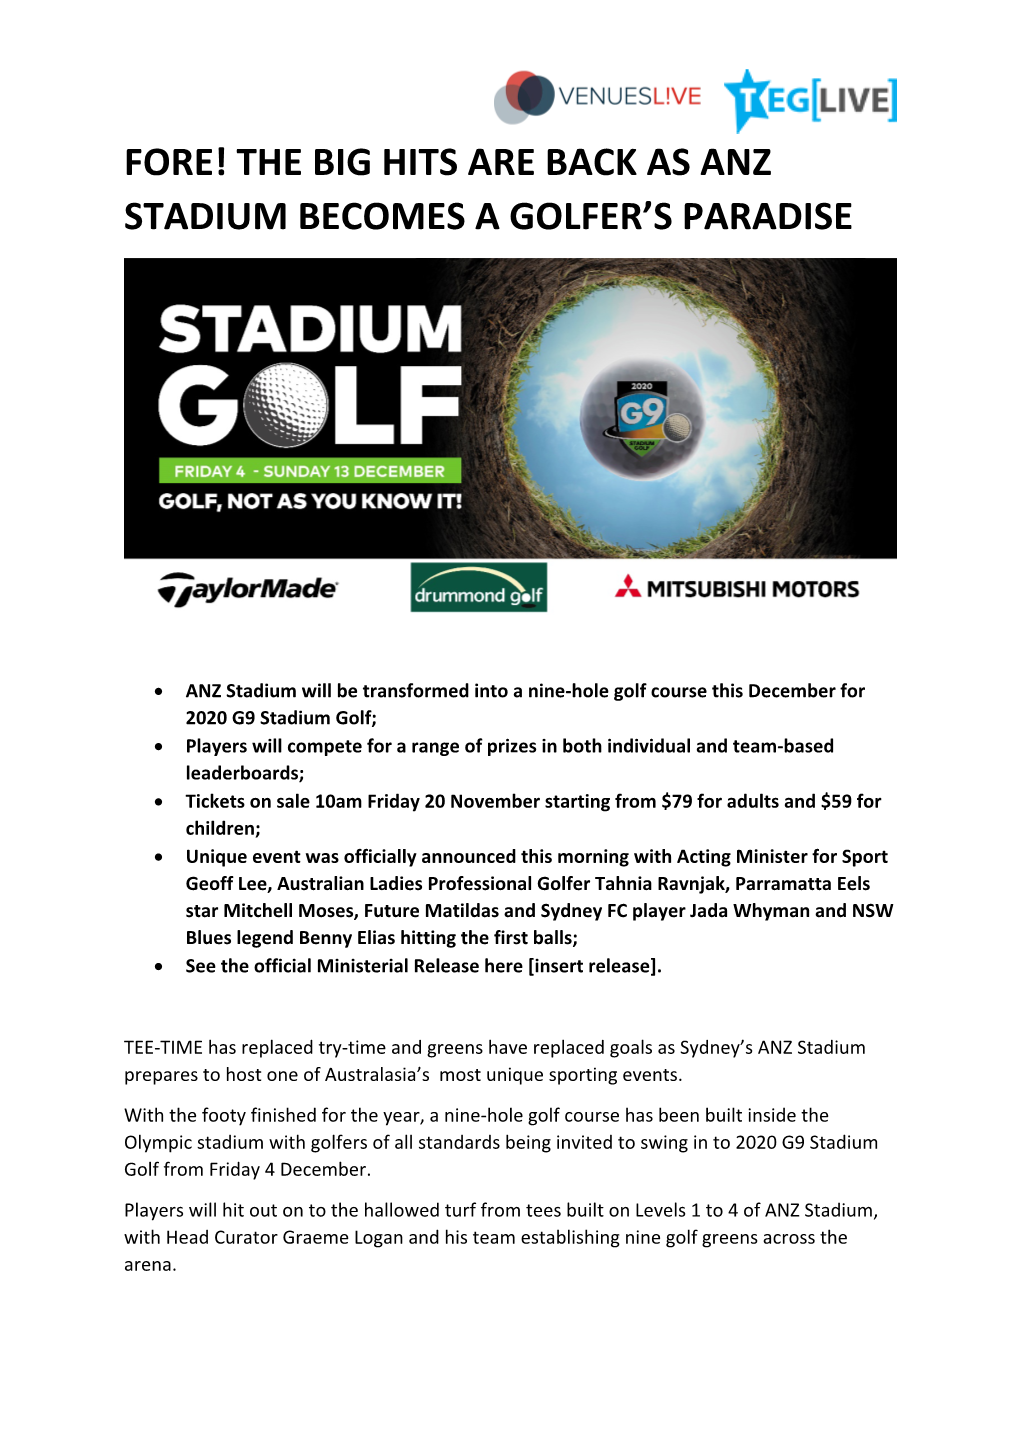 The Big Hits Are Back As Anz Stadium Becomes a Golfer's